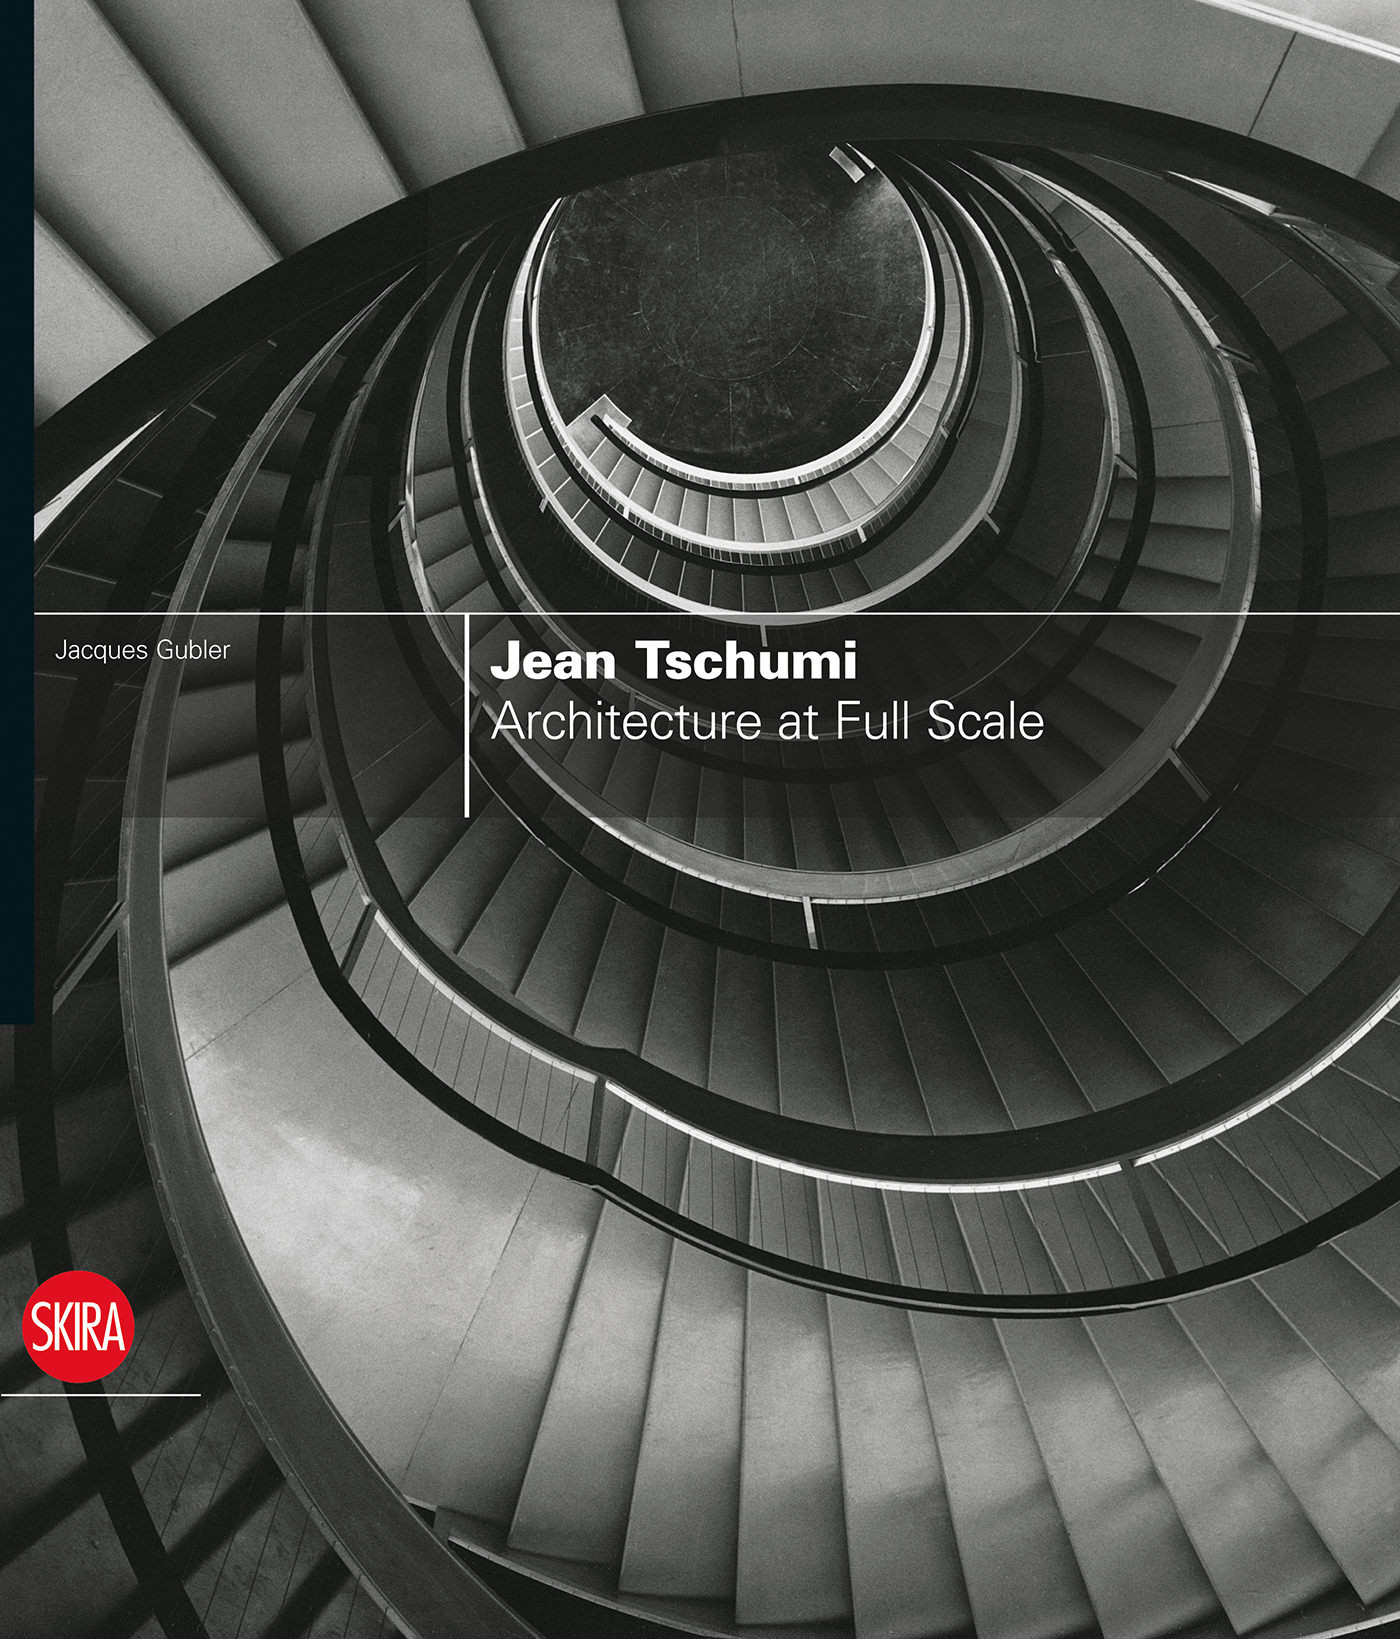 Jean Tschumi: Architecture at Full Scale